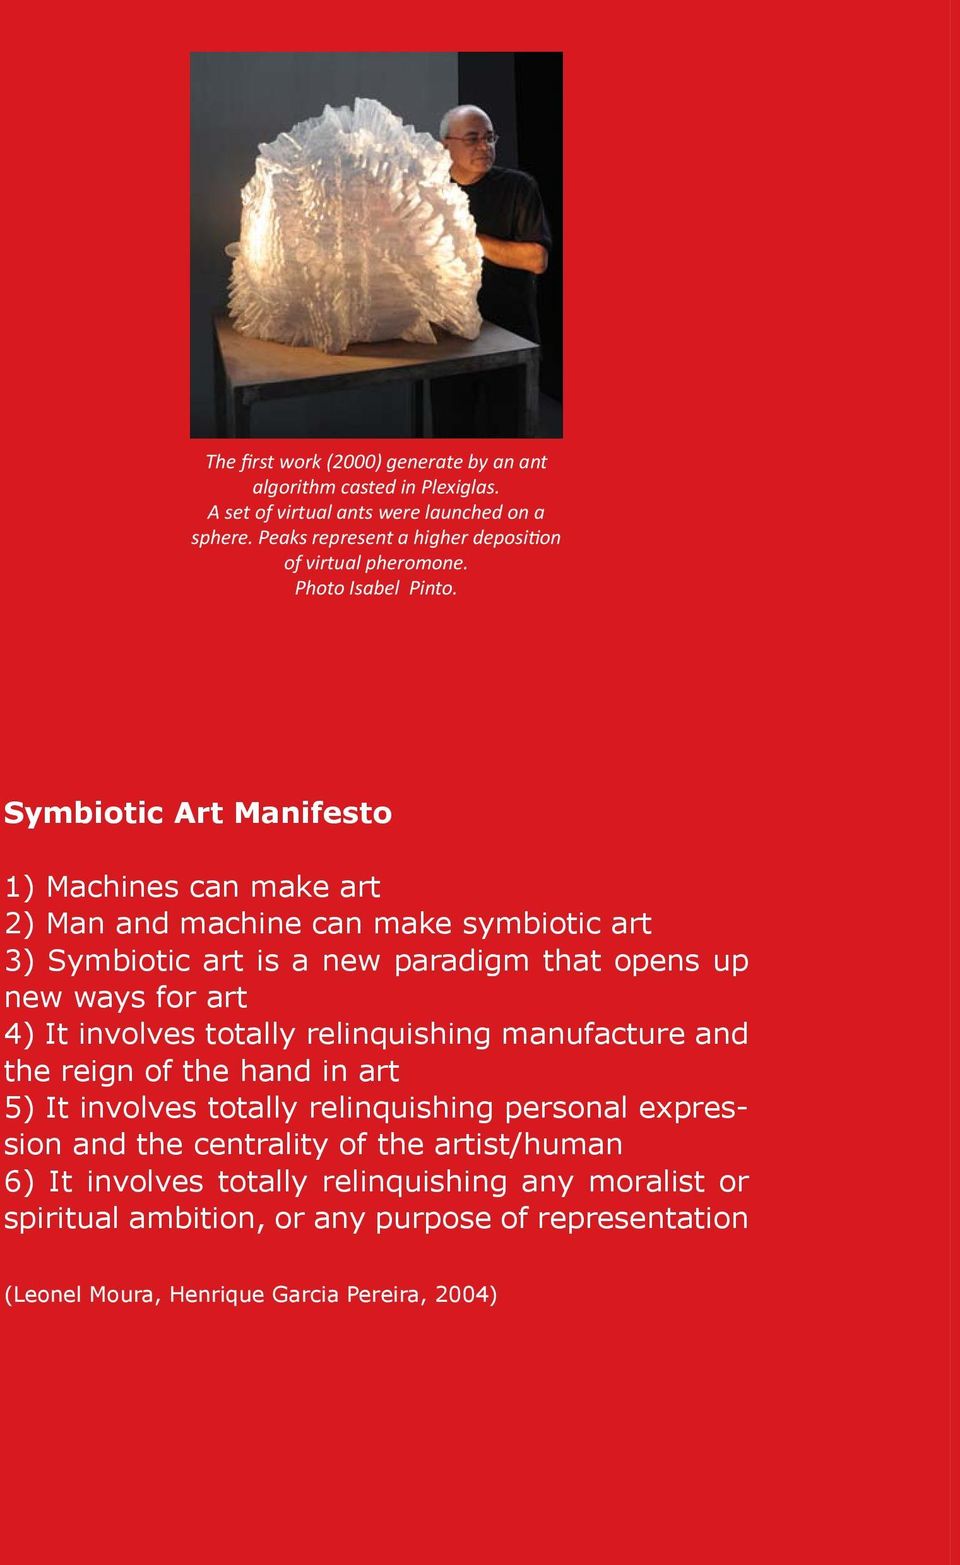 Symbiotic Art Manifesto 1) Machines can make art 2) Man and machine can make symbiotic art 3) Symbiotic art is a new paradigm that opens up new ways for art 4) It involves